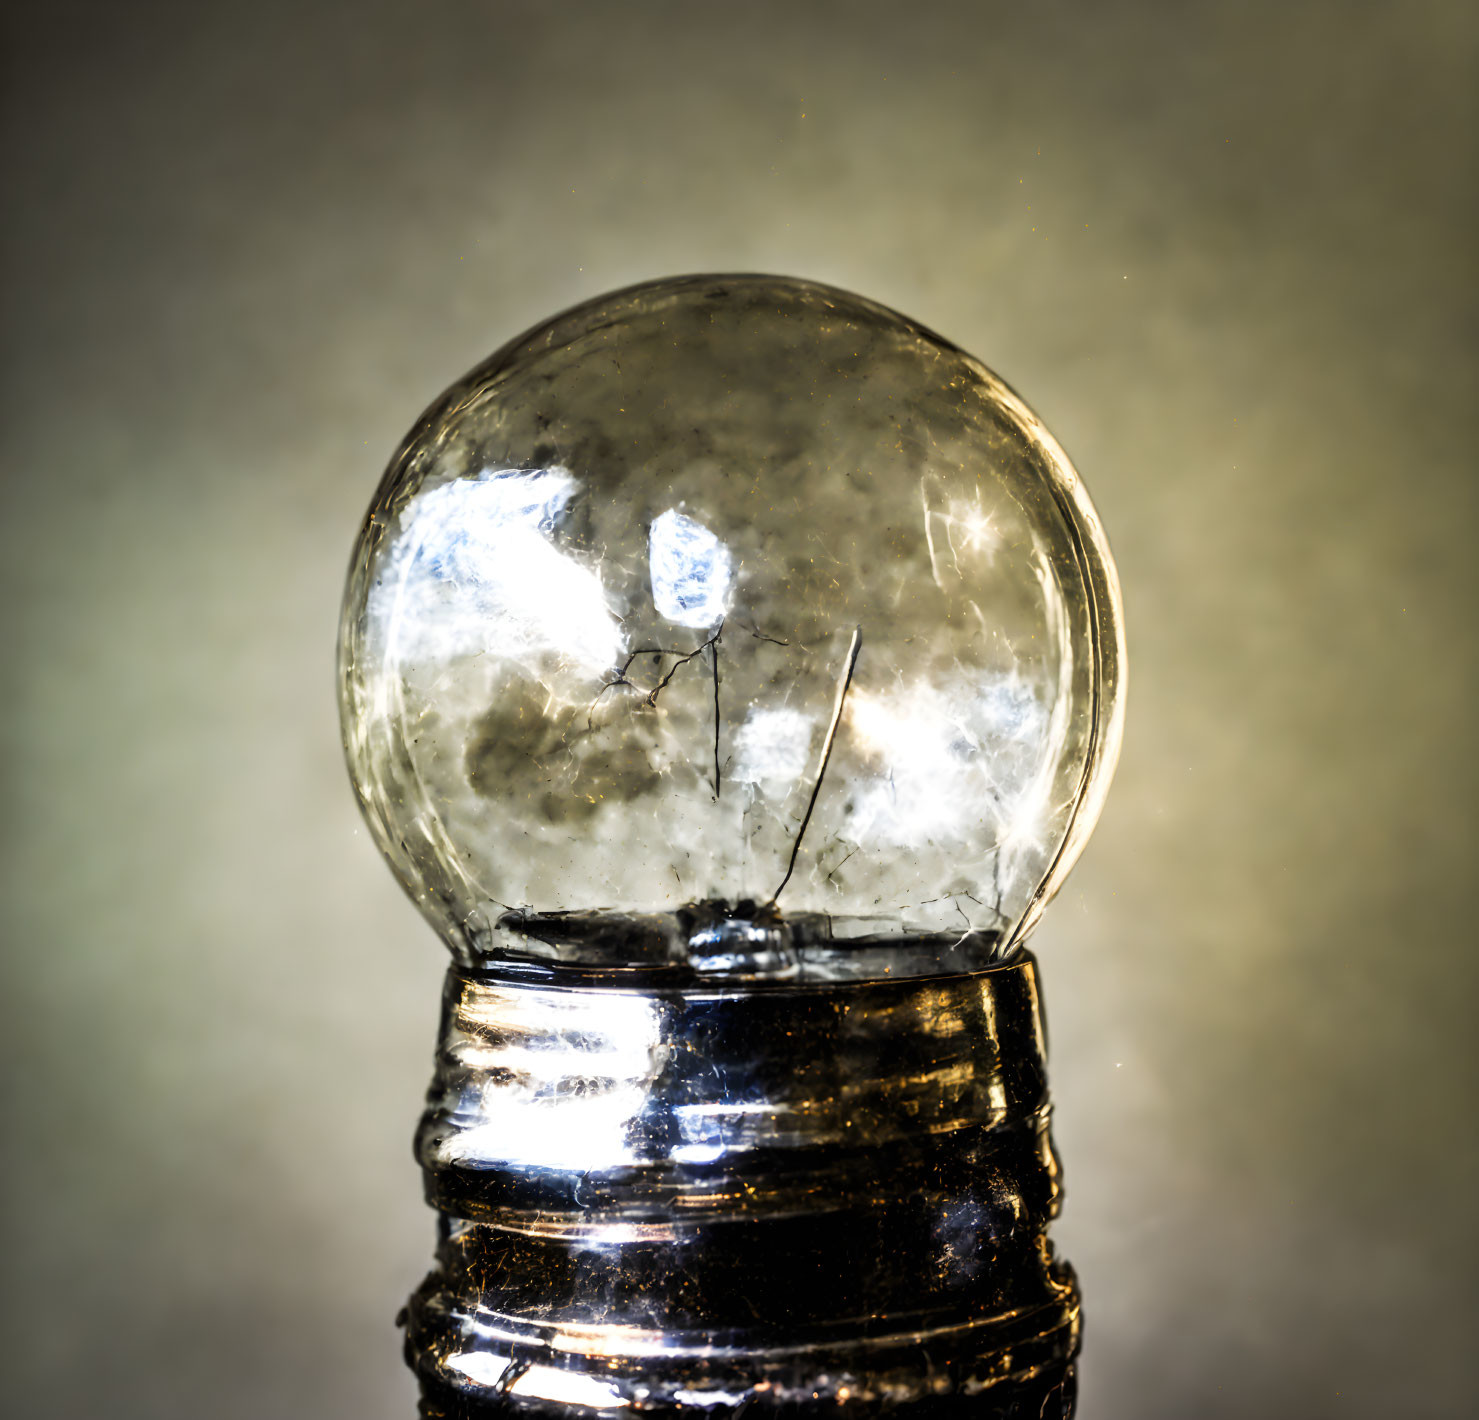 Classic incandescent light bulb with visible filament and reflective base.